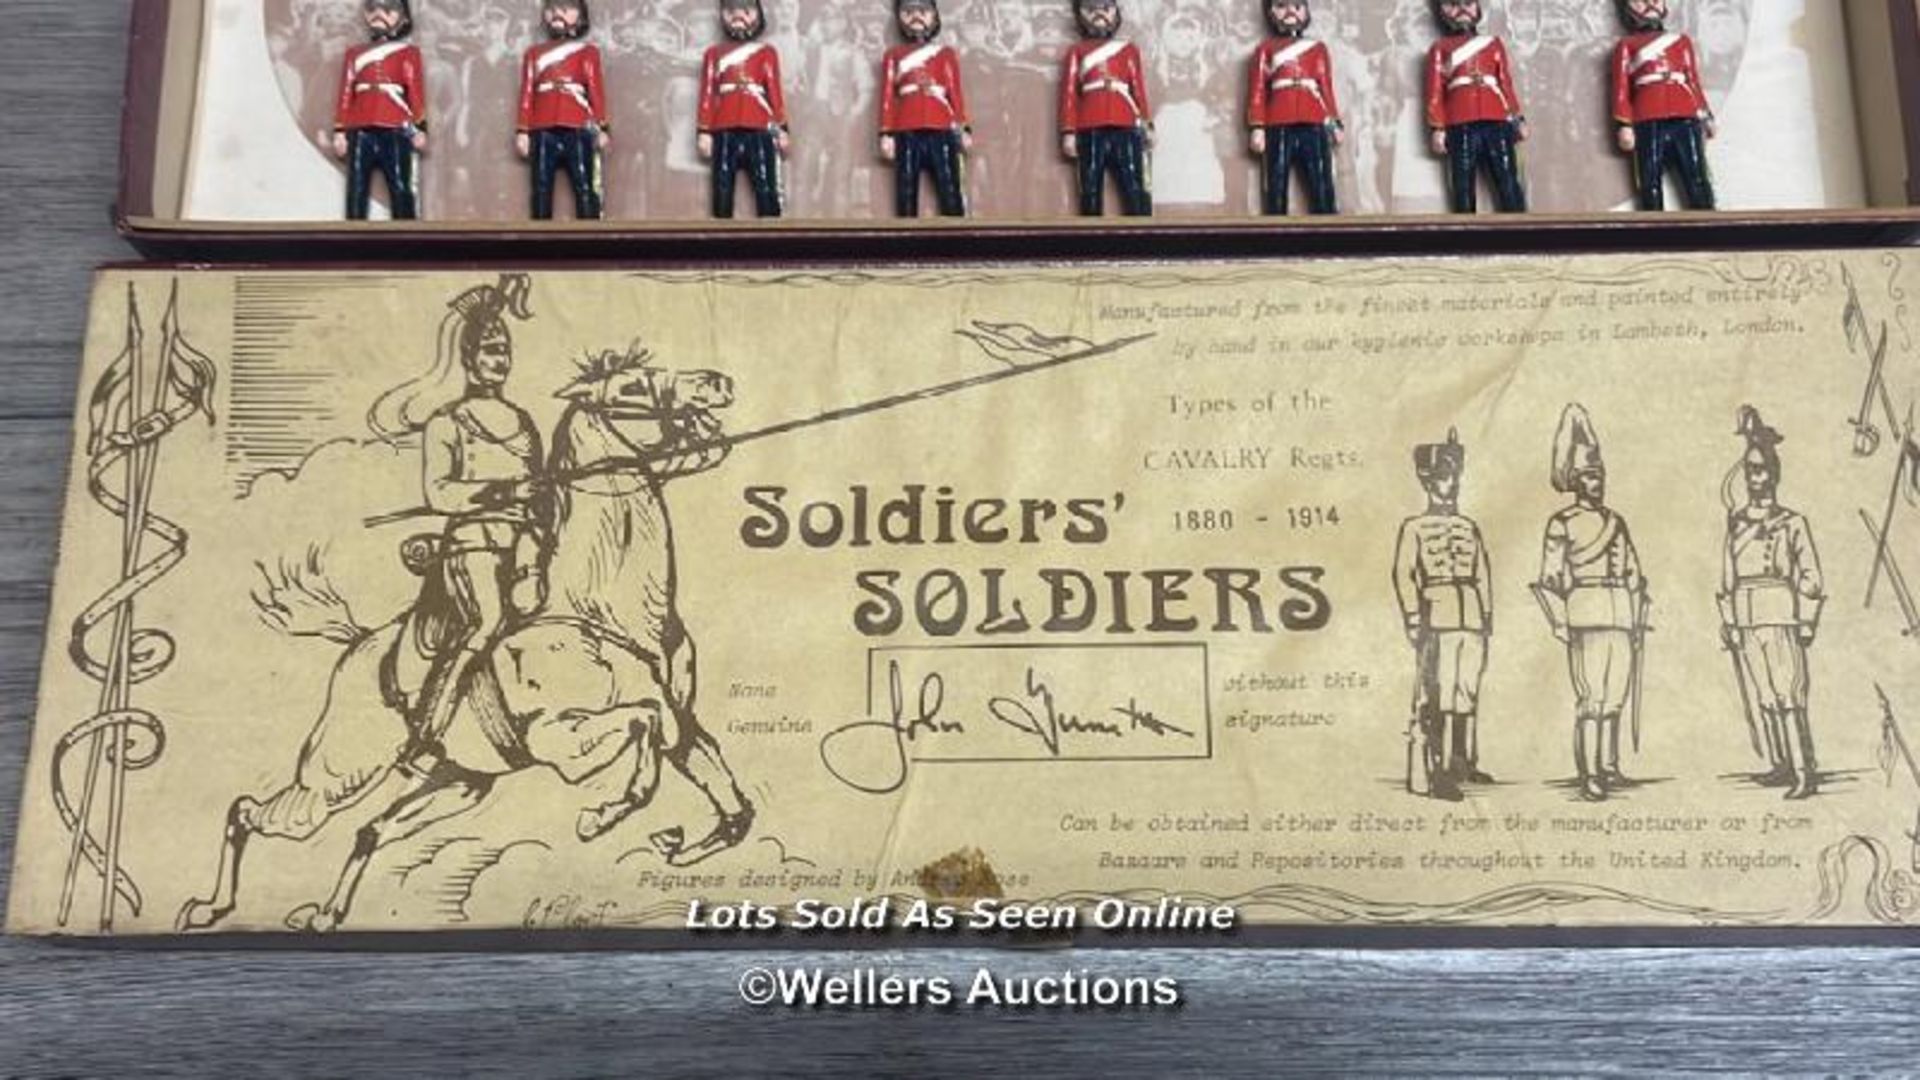 TWO BOXED SETS OF MODEL SOLDIERS DESIGNED BY ANDREW ROSE & JOHN TUNSTILL, FUSILIER REGTS. 1880 - - Image 4 of 5